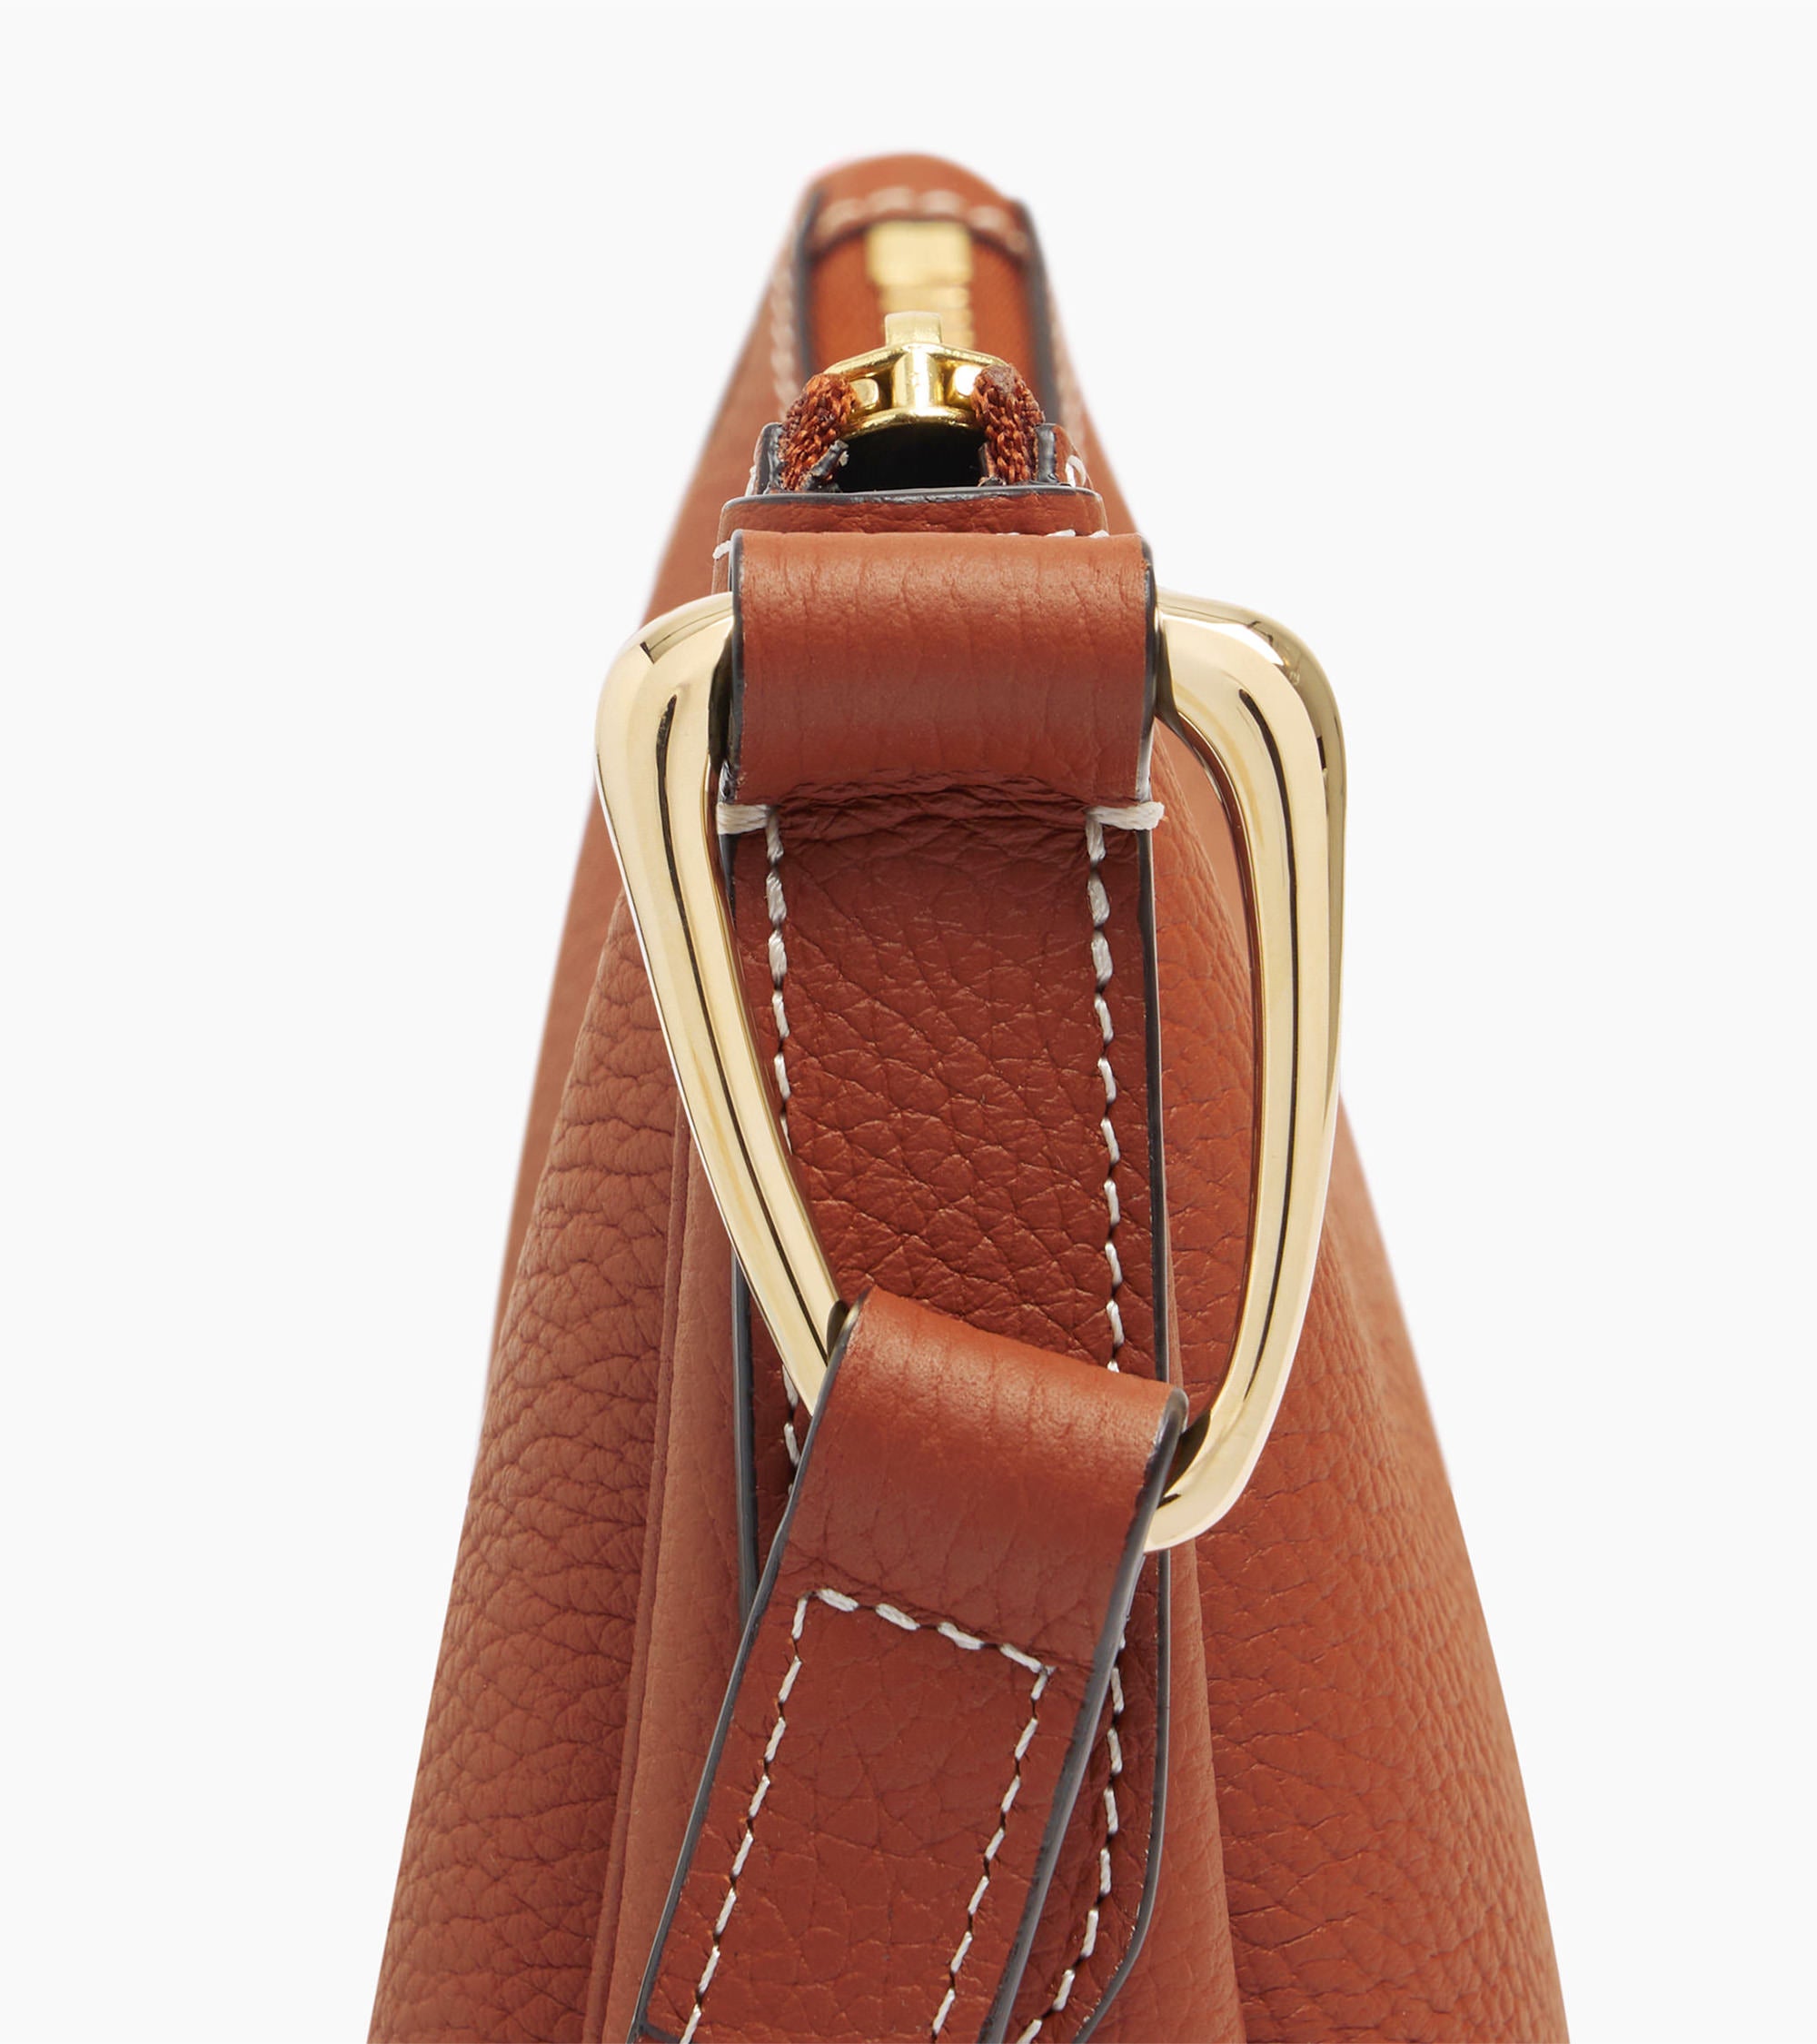 Madeleine grained leather baguette bag